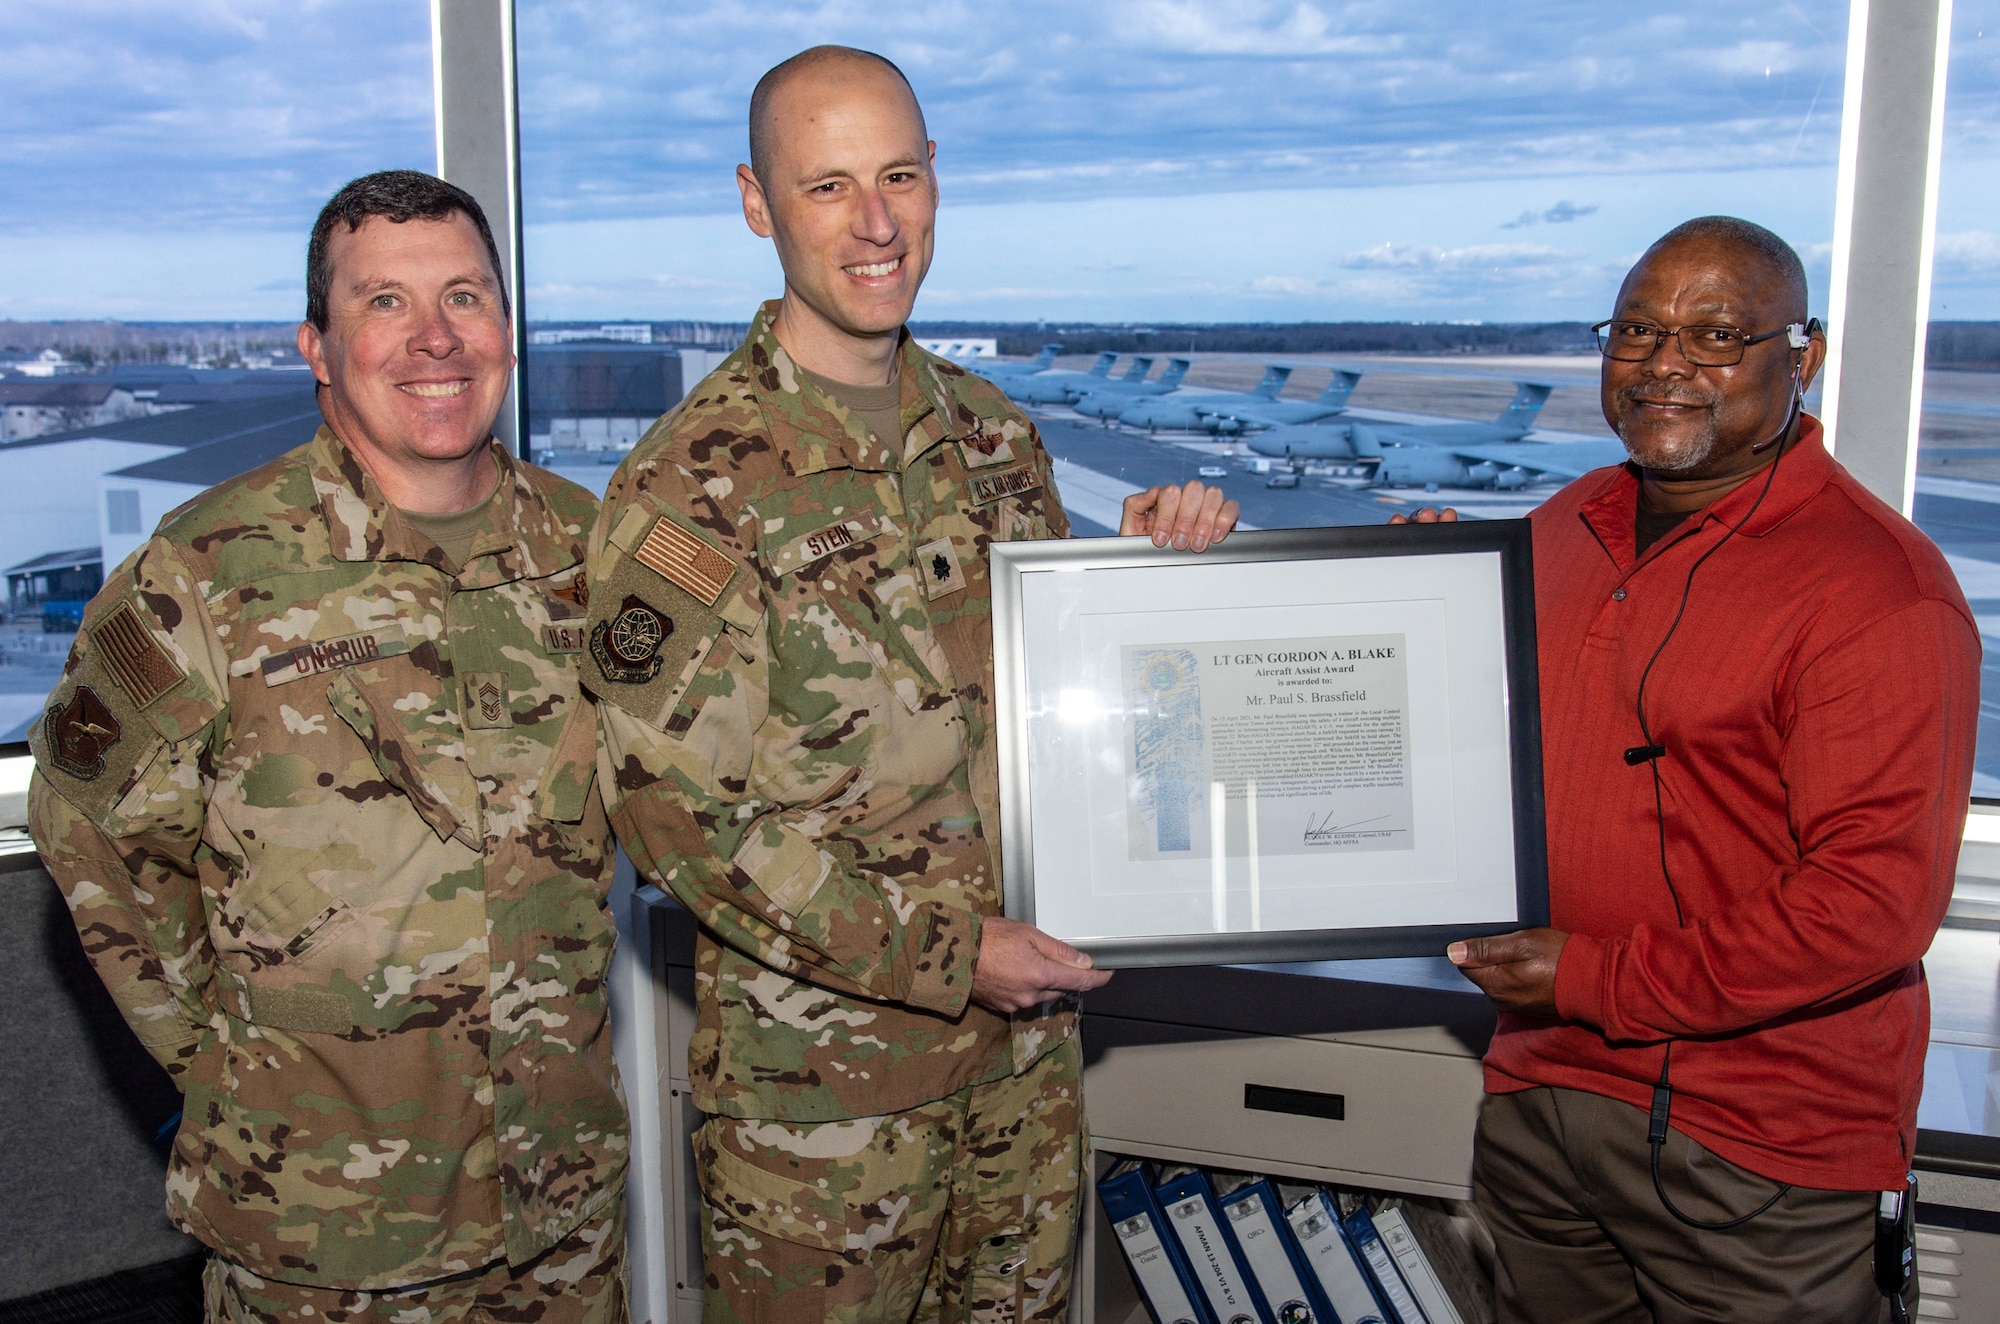 Chief Master Sgt. Daniel Unkrur, left, 436th Operations Group superintendent; and Lt. Col. Andrew Stein, center, 436th OG deputy commander, present Paul Brassfield, 436th Operations Support Squadron air traffic control tower watch supervisor, with the Lt. Gen. Gordon A. Blake Aircraft Assist Award at Dover Air Force Base, Delaware, March 3, 2022. Brassfield�s quick reaction, exceptional crew resource management and dedication to the tower team concept prevented a potential aircraft mishap and significant loss of life. (U.S. Air Force photo by Roland Balik)